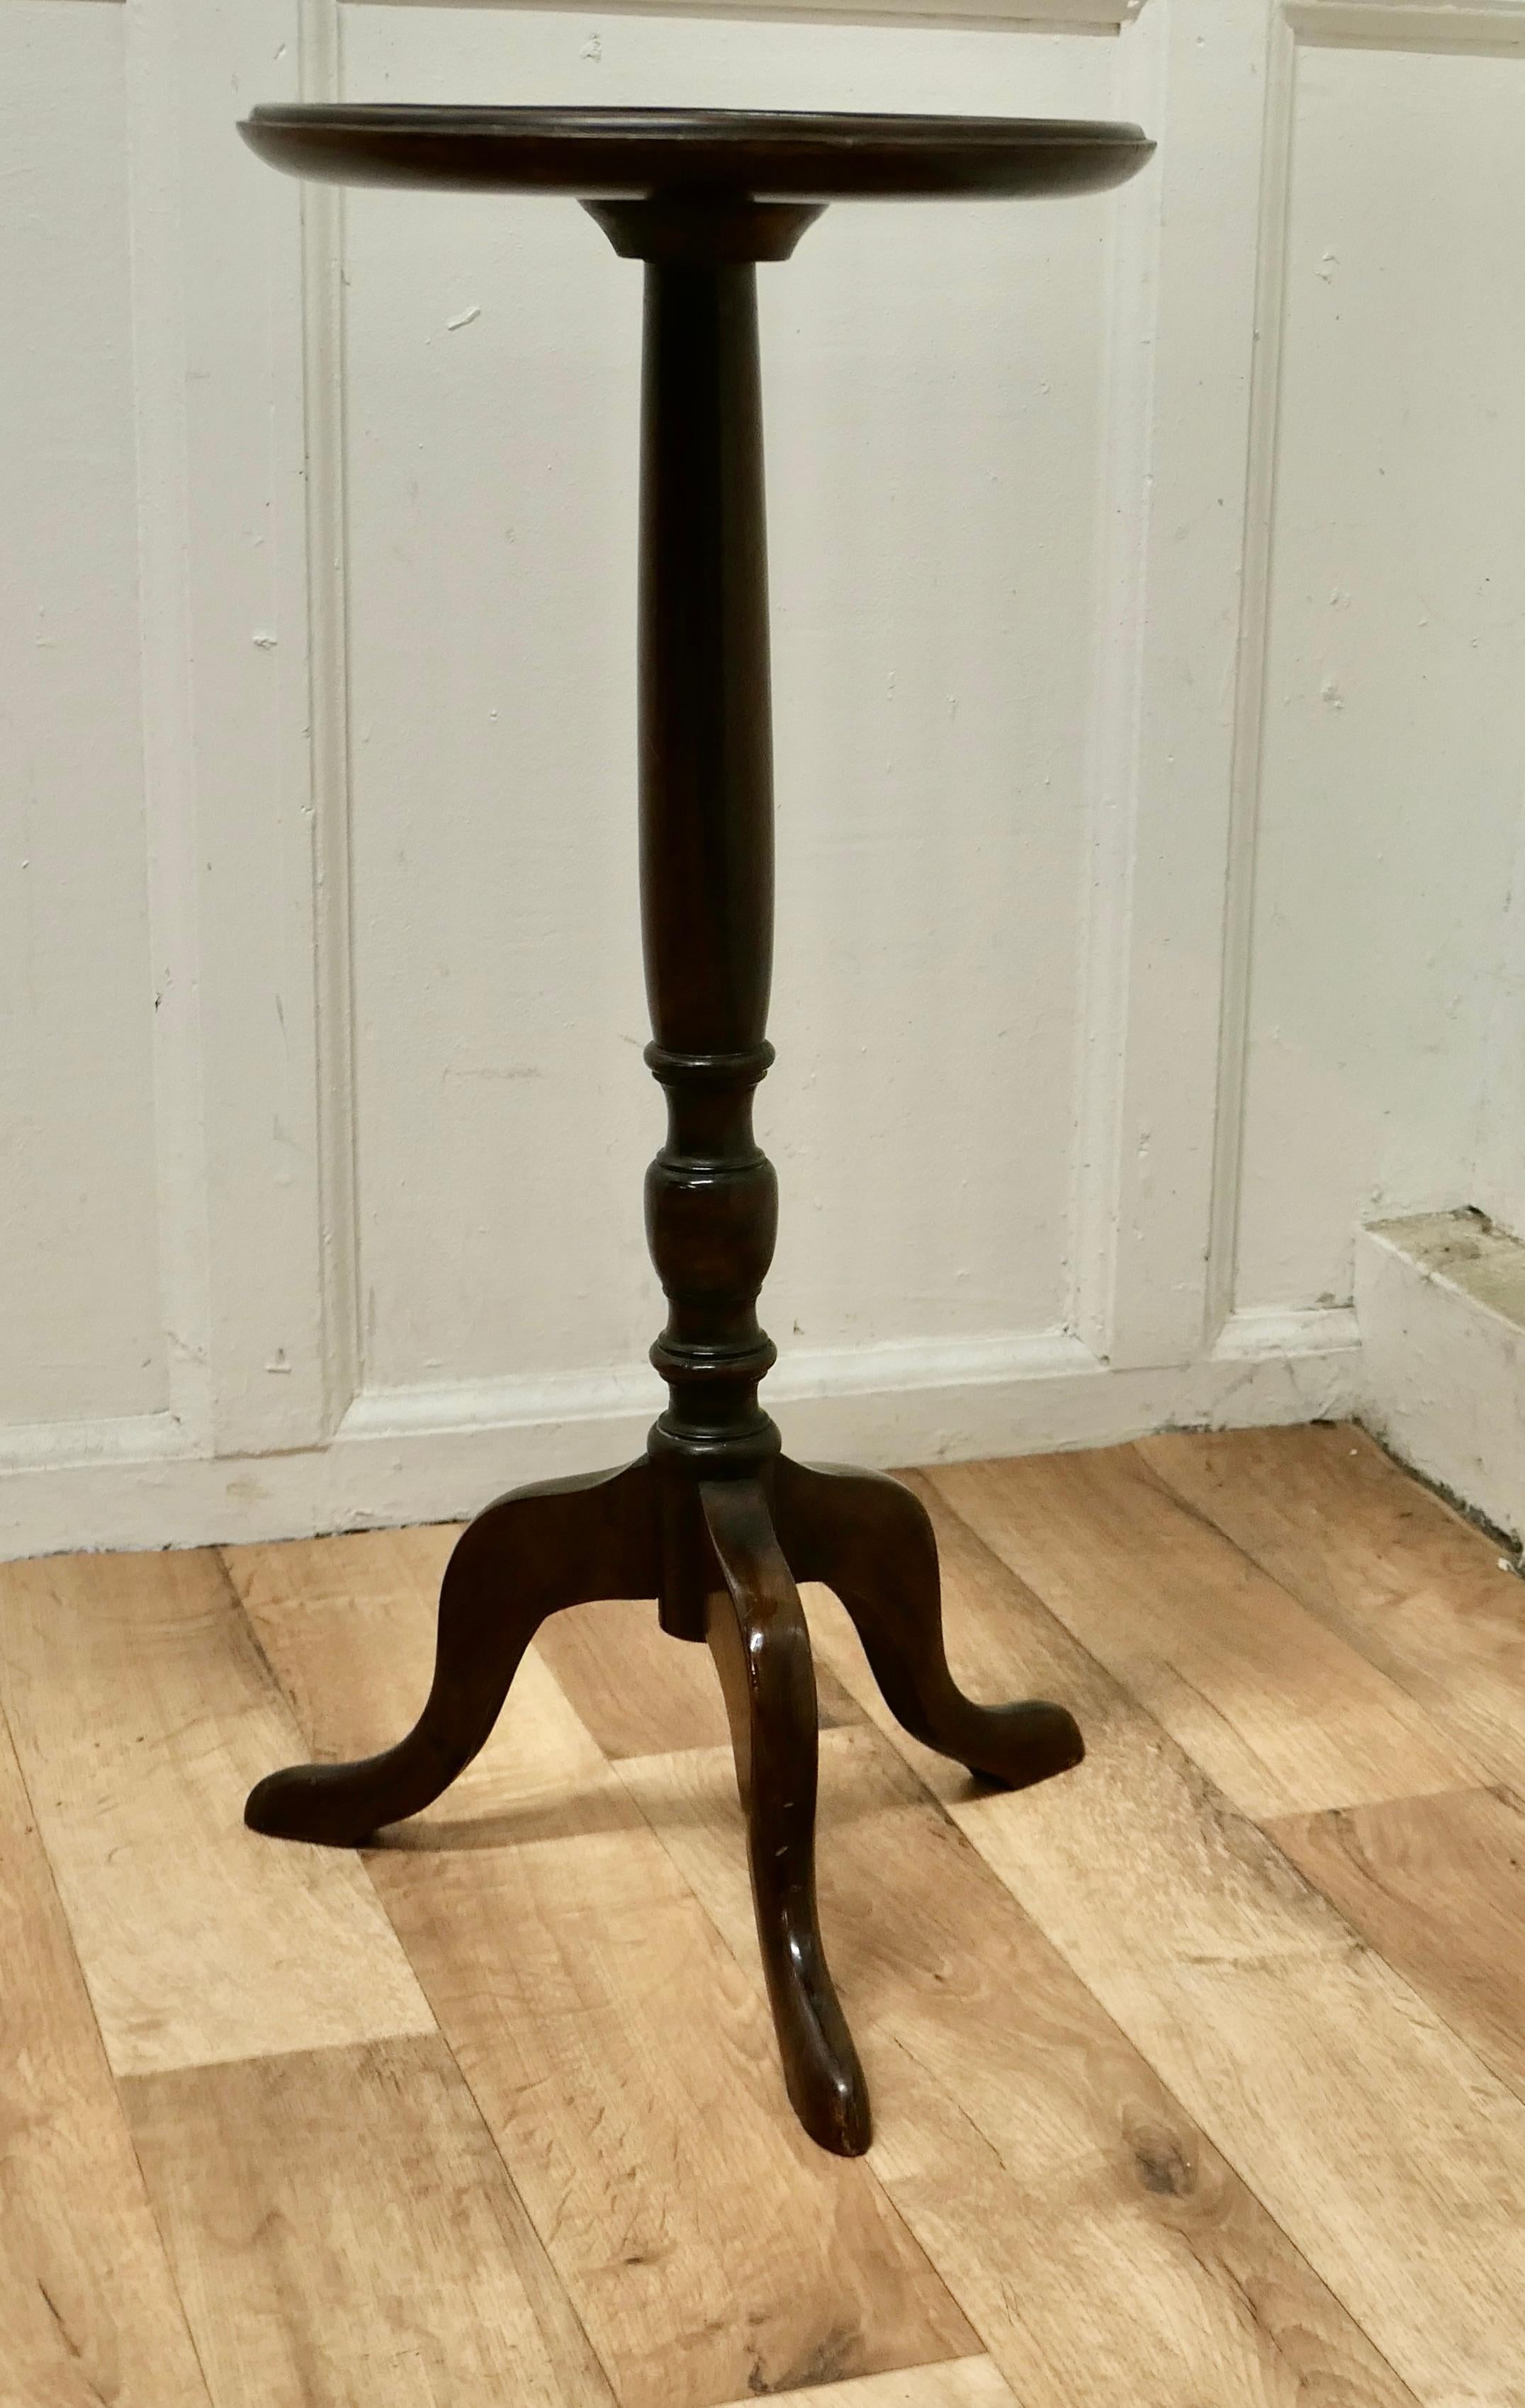 Petite walnut wine table

This lovely table stands on a three footed base and has a attractive turned centre leg.
The 1 piece round Walnut top has a dainty raised and moulded edge.
The table is in good sound condition there are a few ring marks